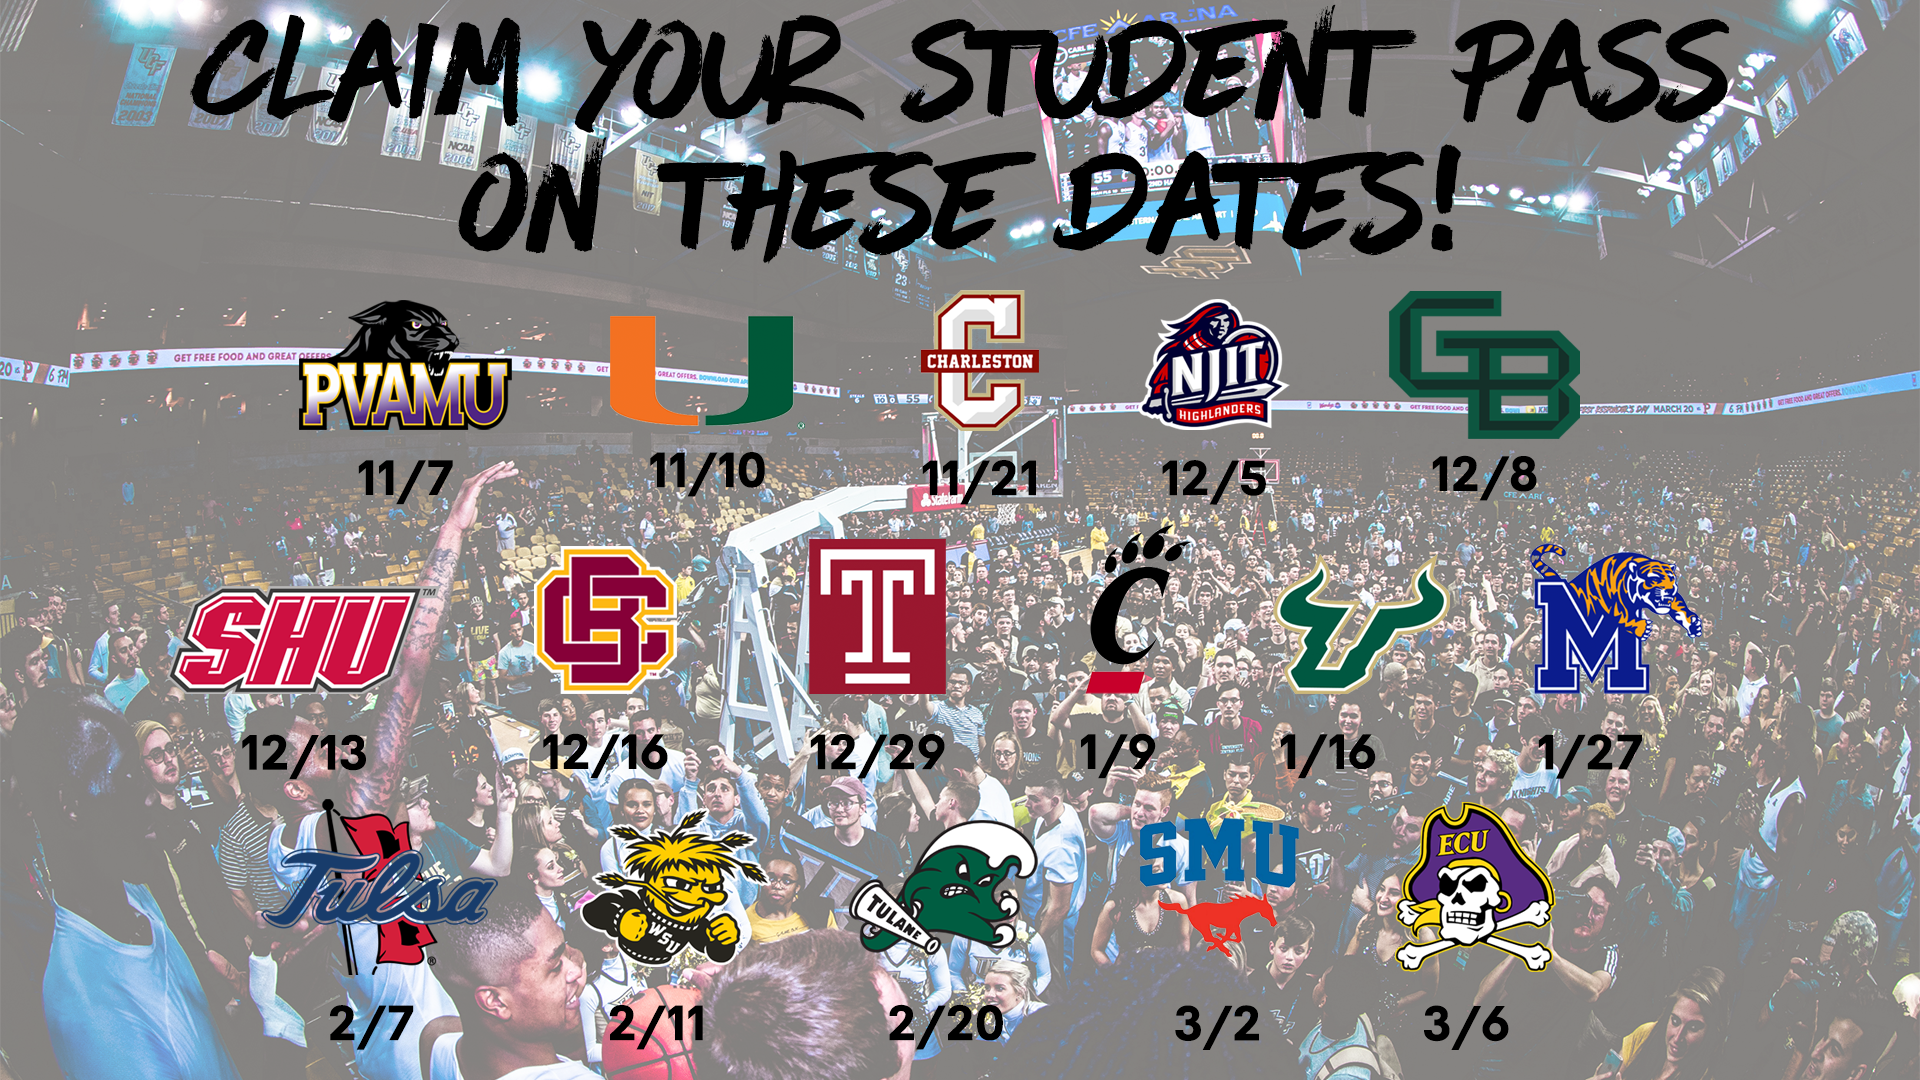 Claim Your Student Pass On These Dates!